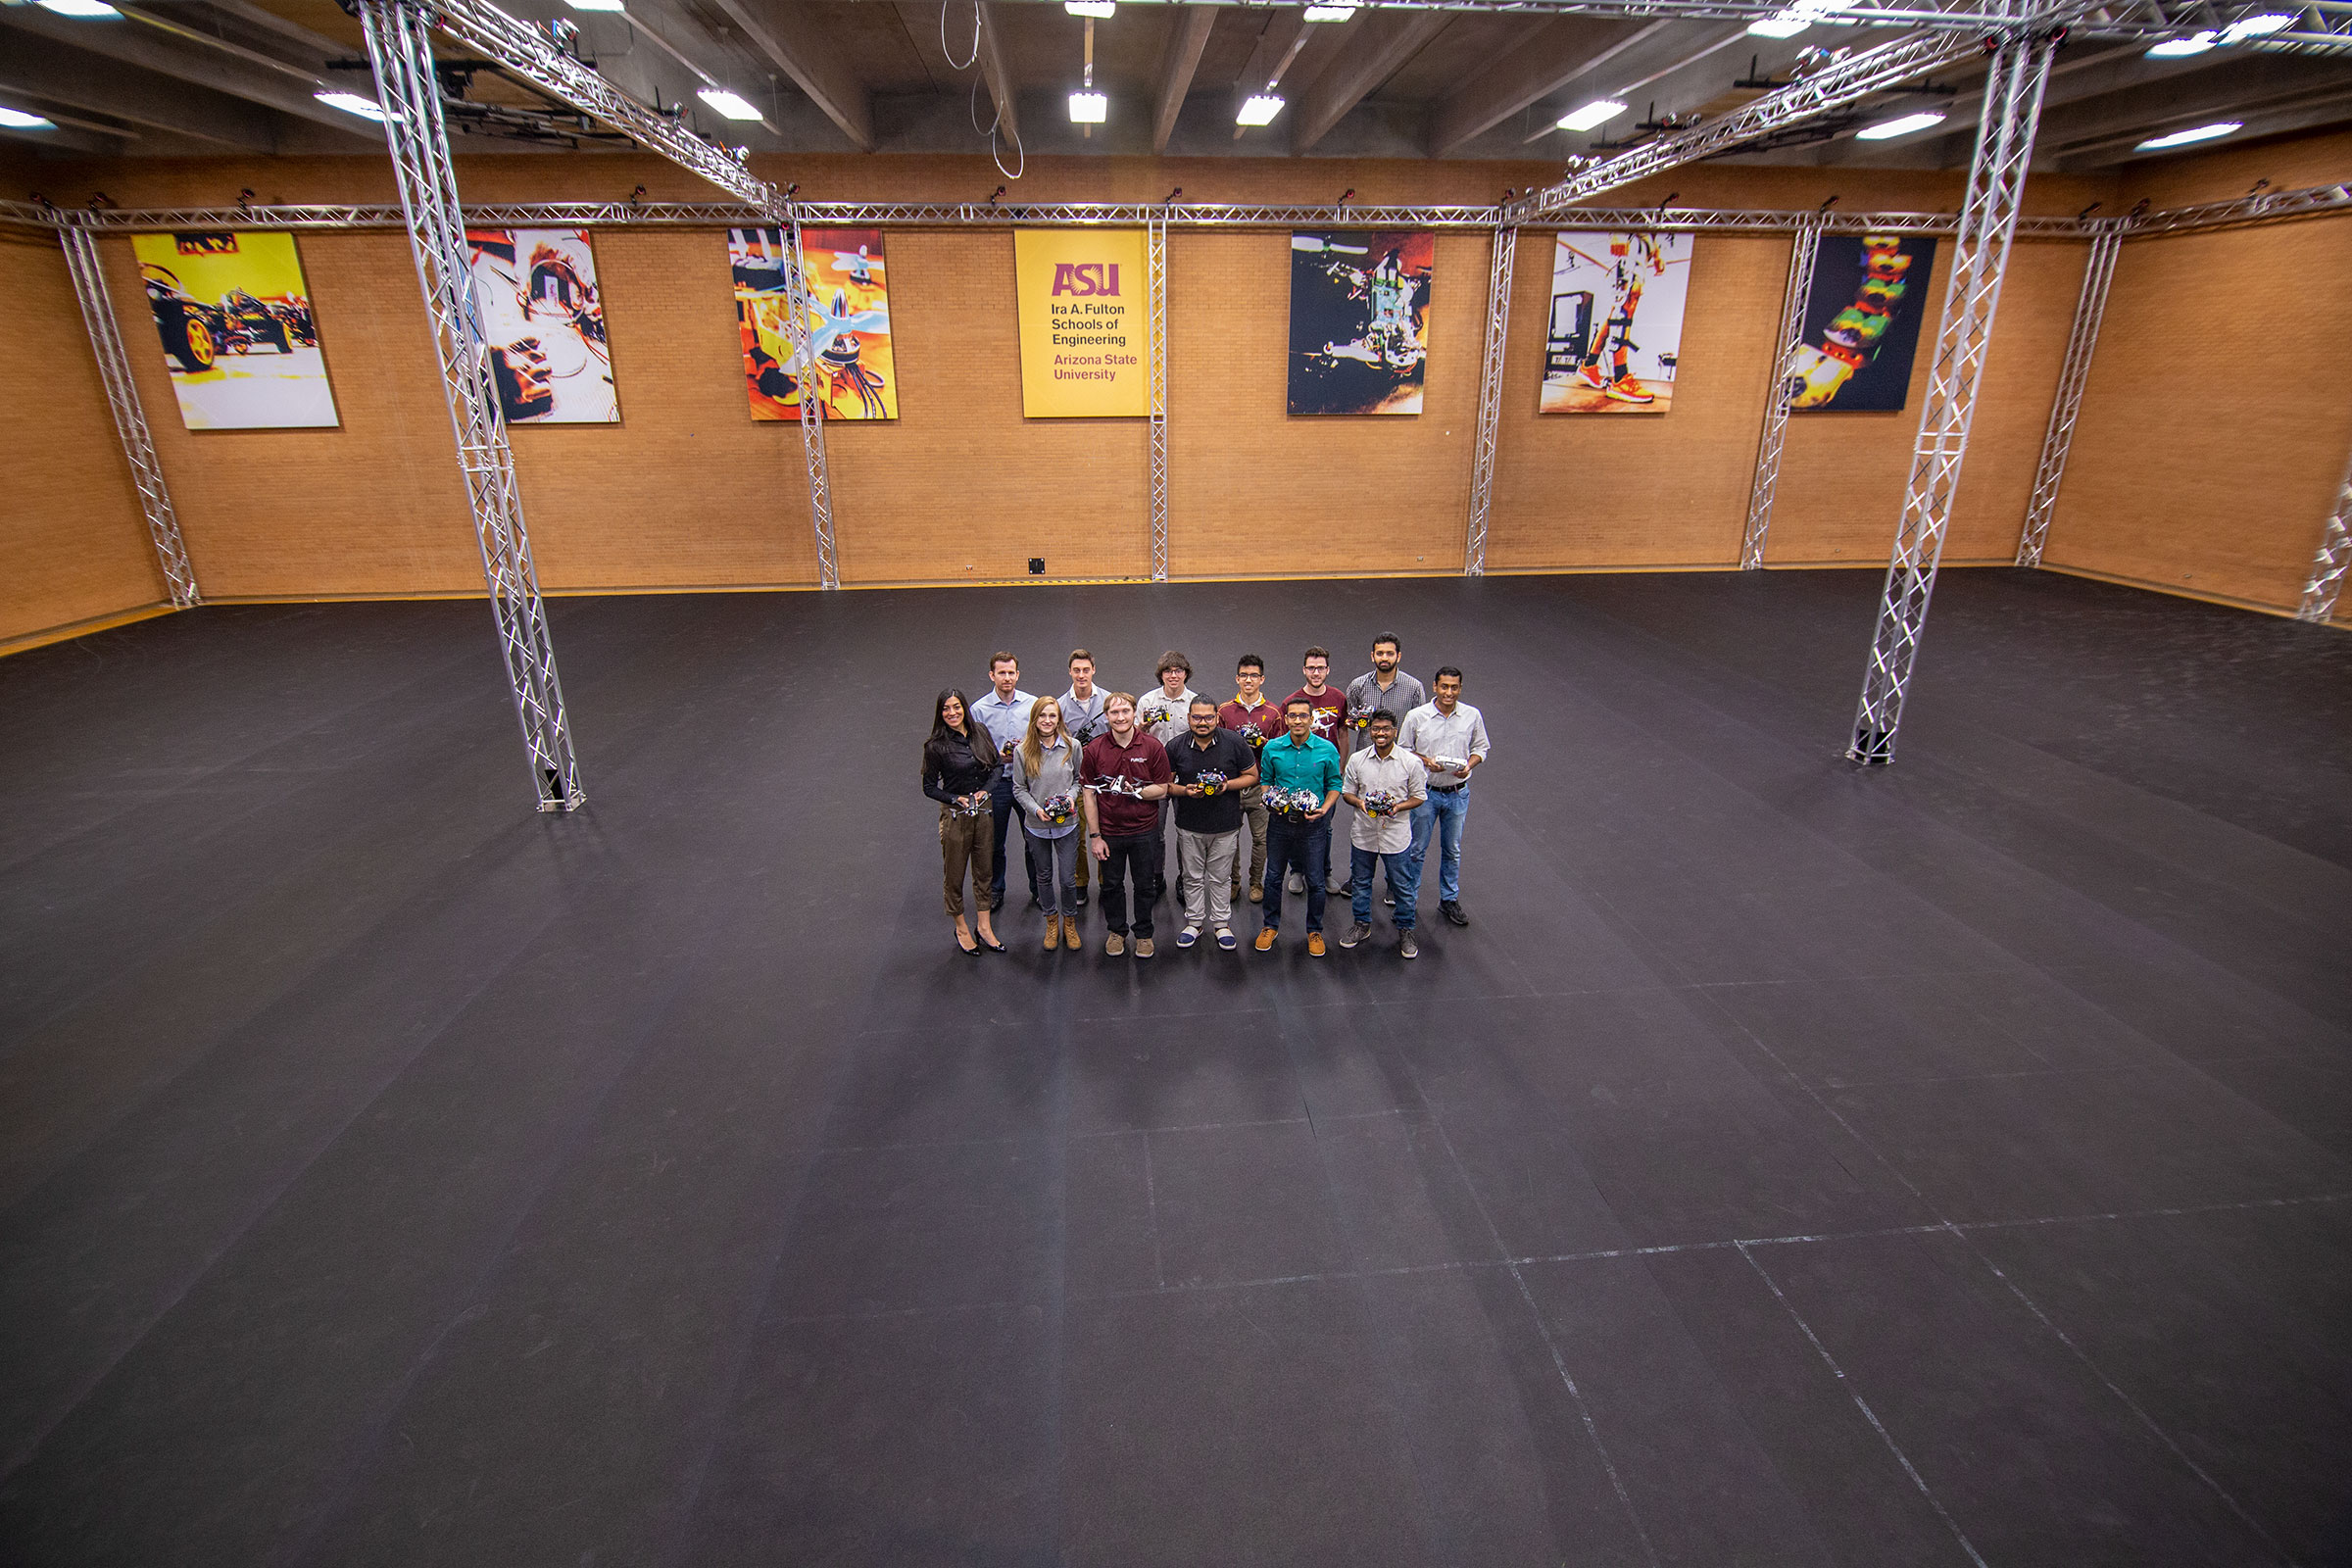 A group of about 20 researchers stand in the middle of the immense ASU Drone Studio, surrounded by tons of open space.